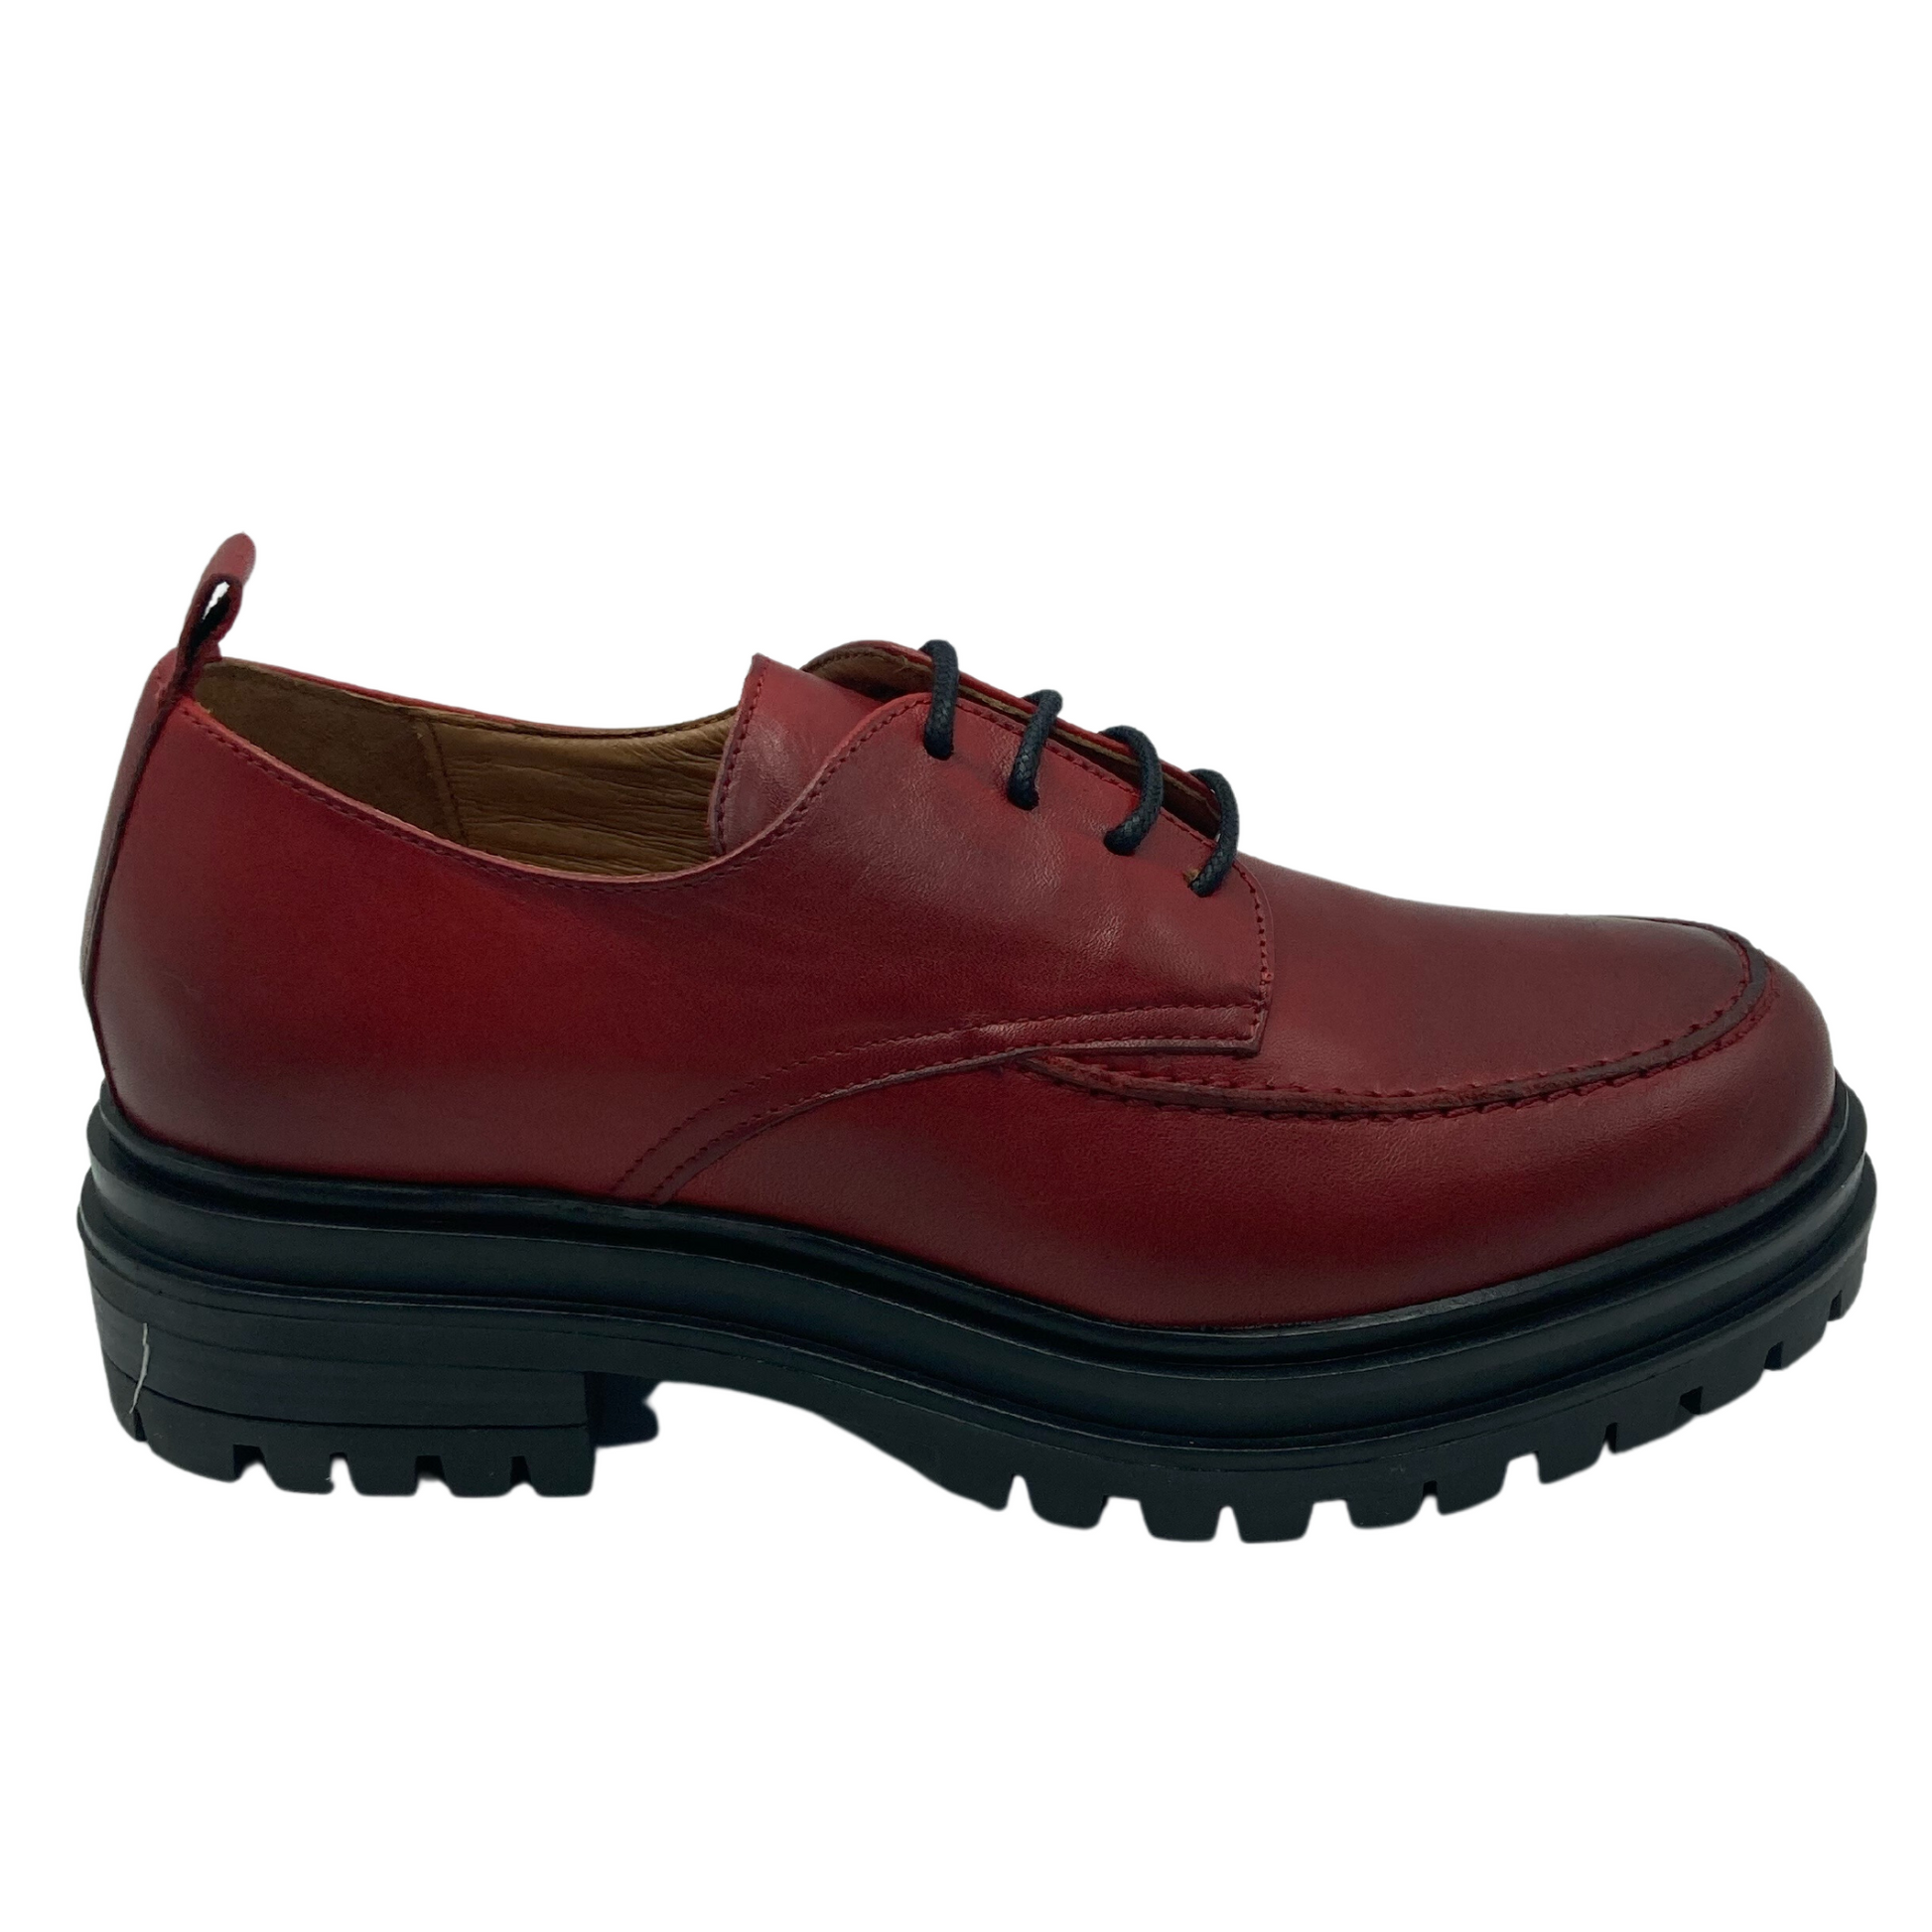 Right facing view of red leather loafer with tan insole and black chunky rubber sole